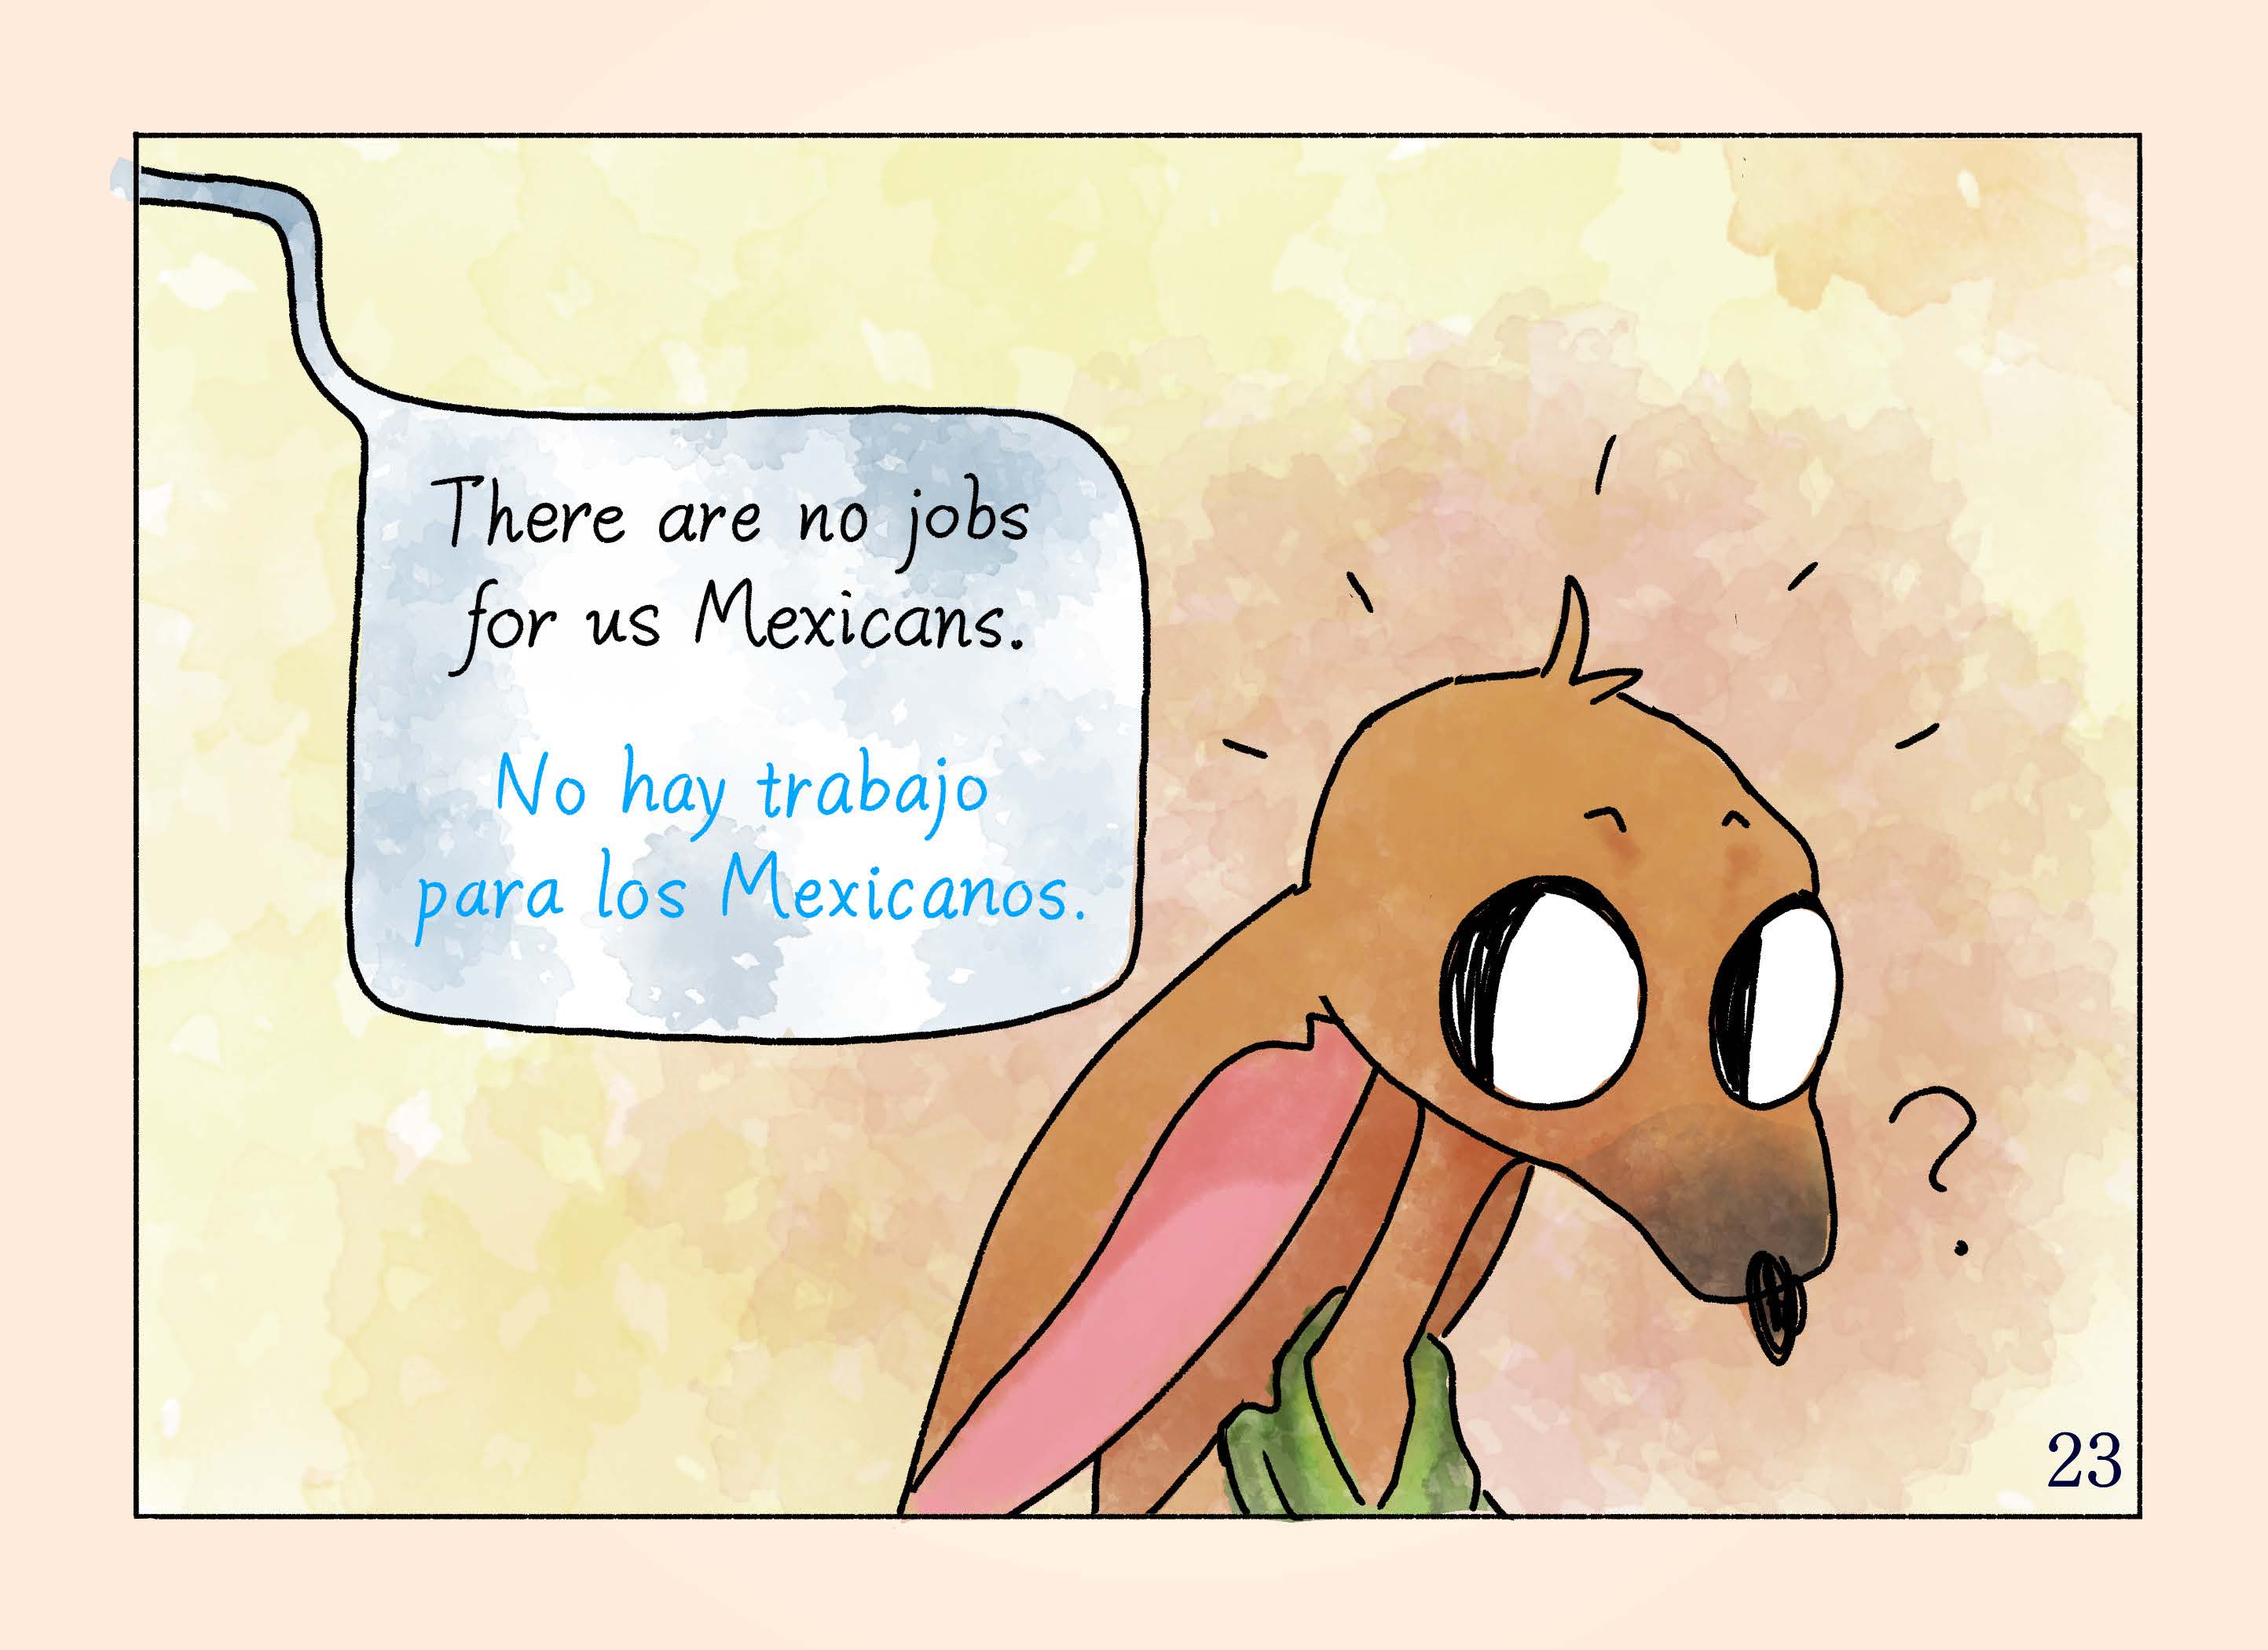 Illustration of a Chihuahua dog with dialogue in Spanish and English saying "There are no jobs for us Mexicans."